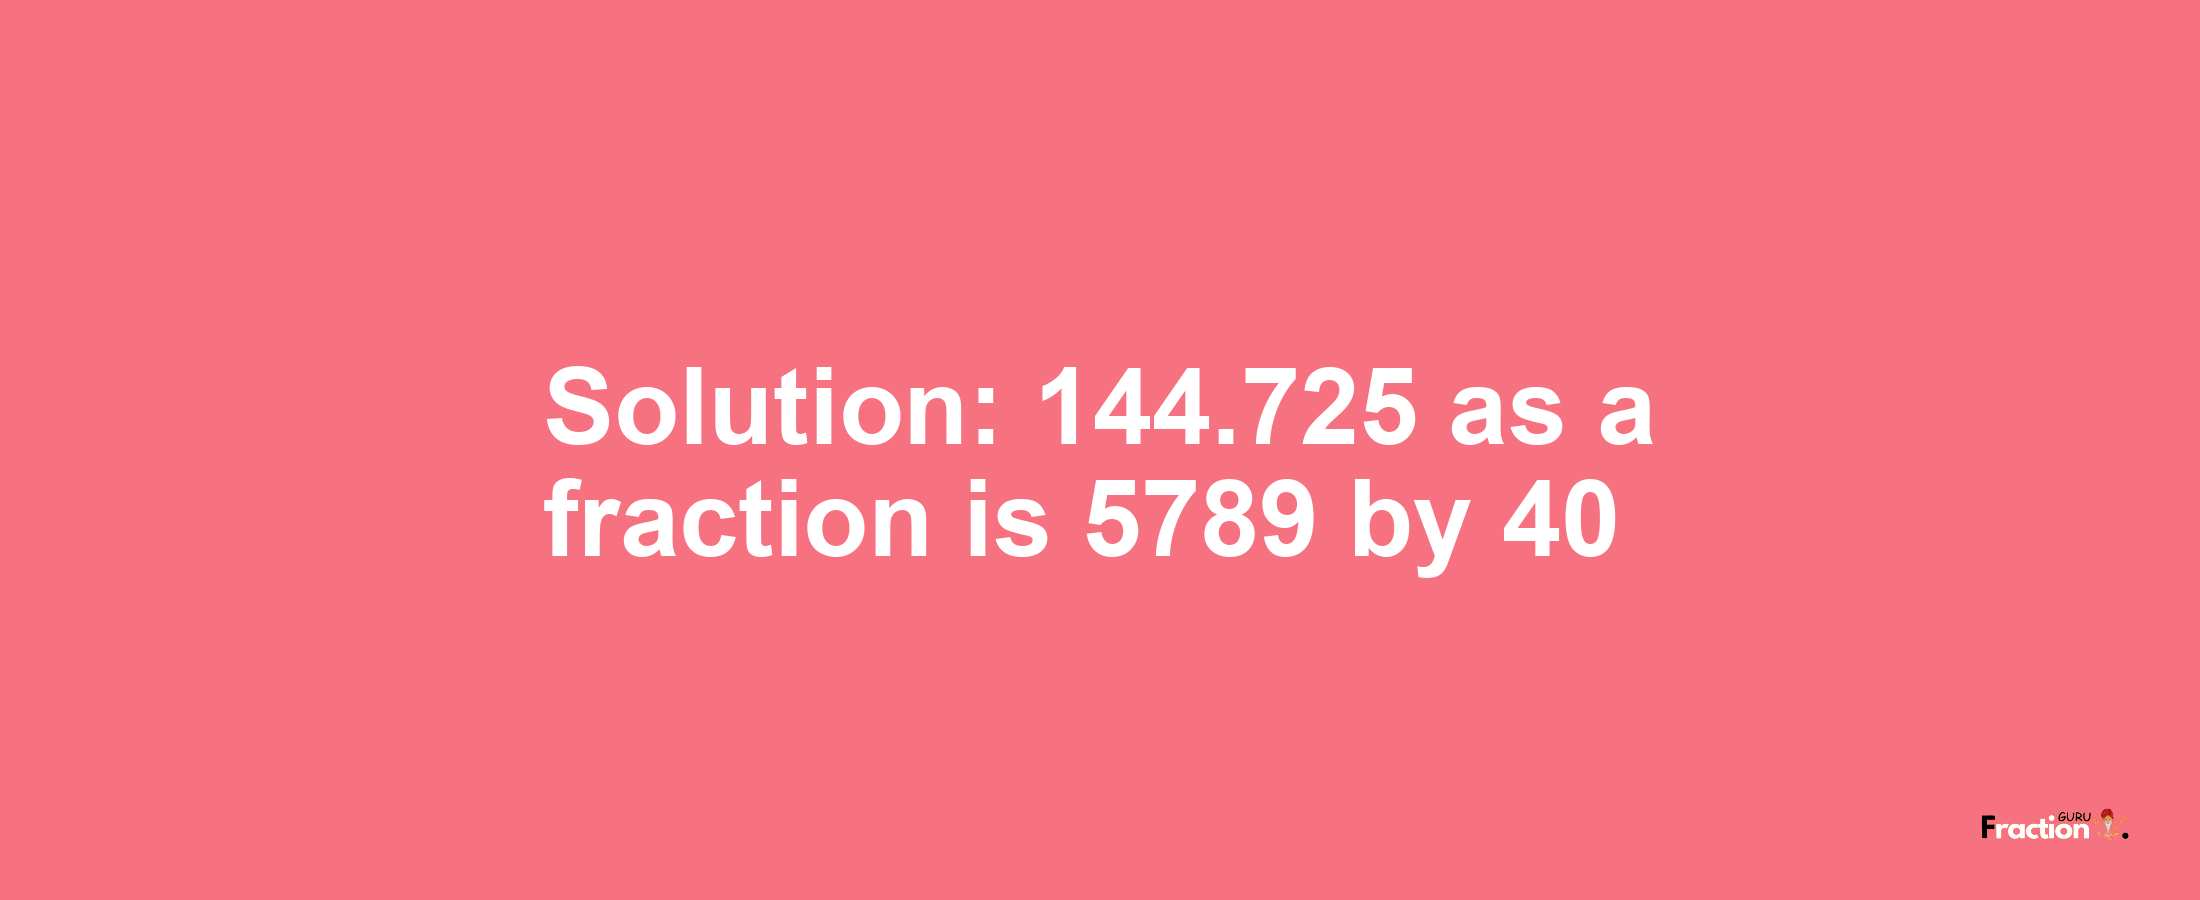 Solution:144.725 as a fraction is 5789/40